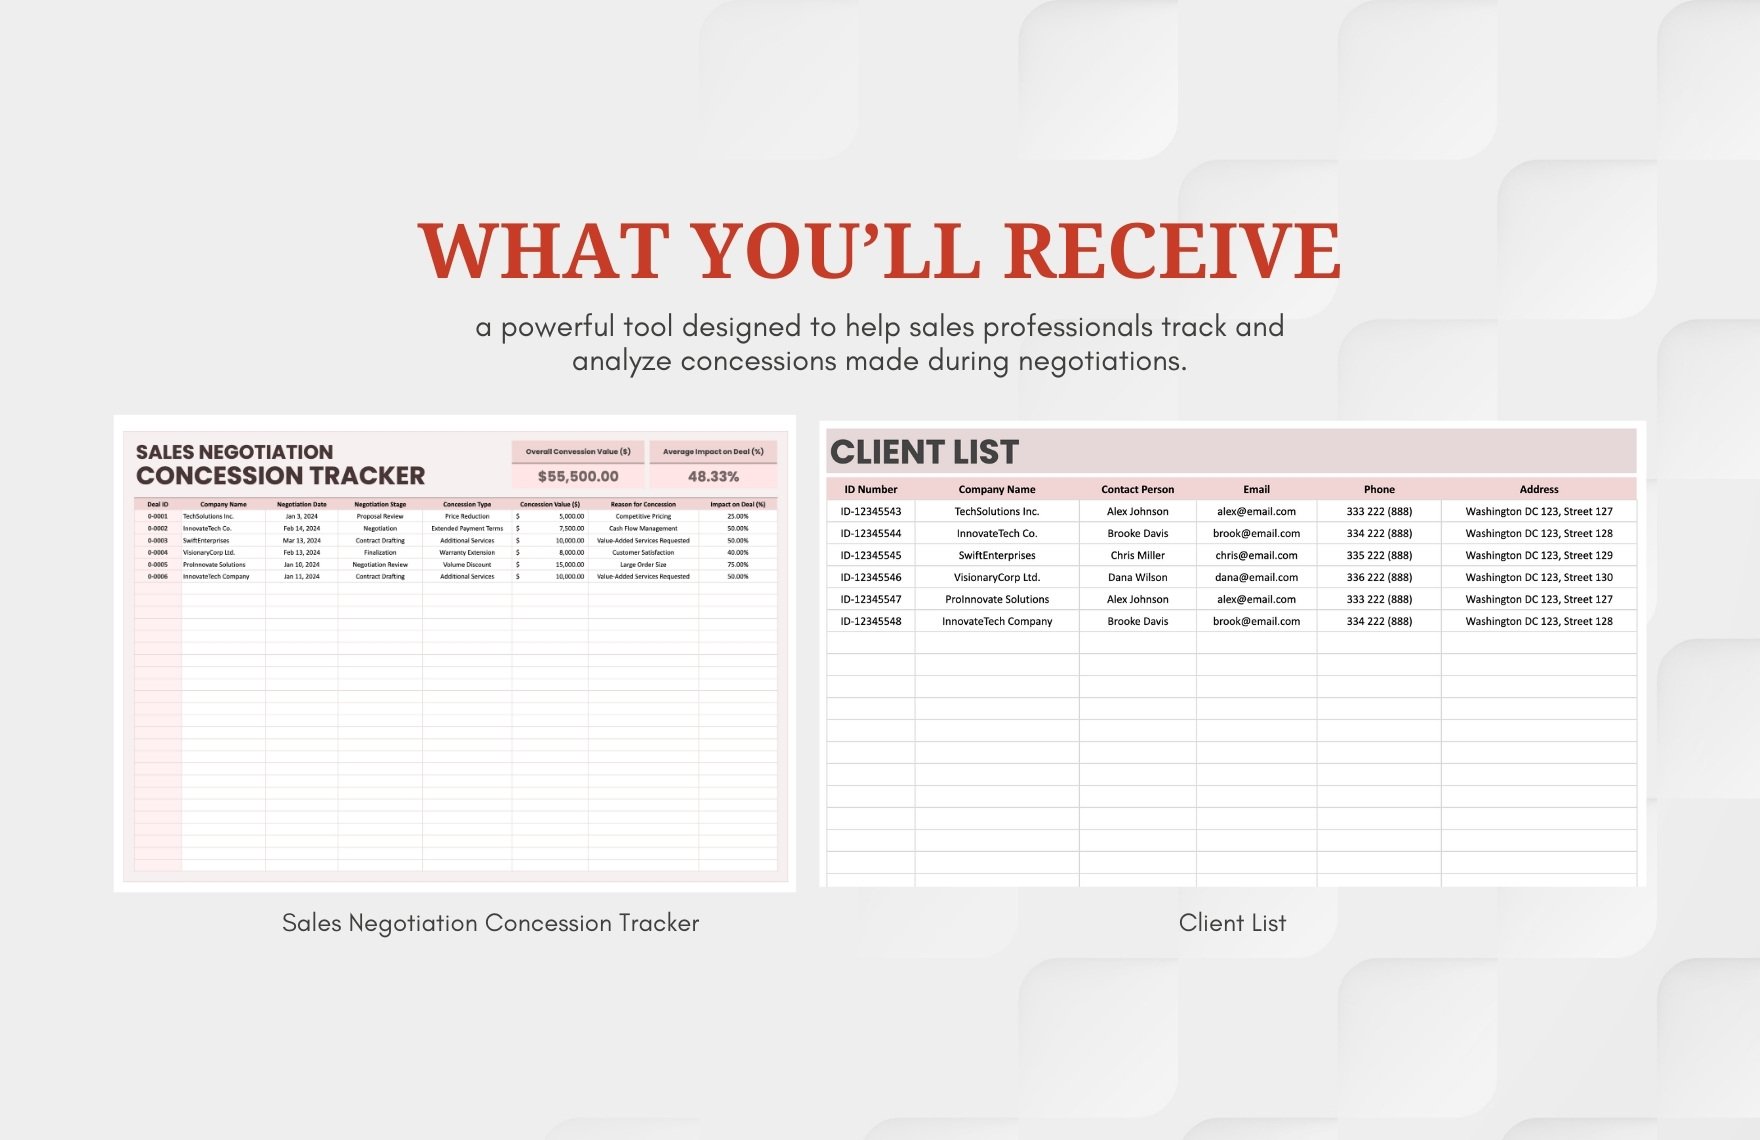 Sales Negotiation Concession Tracker Template